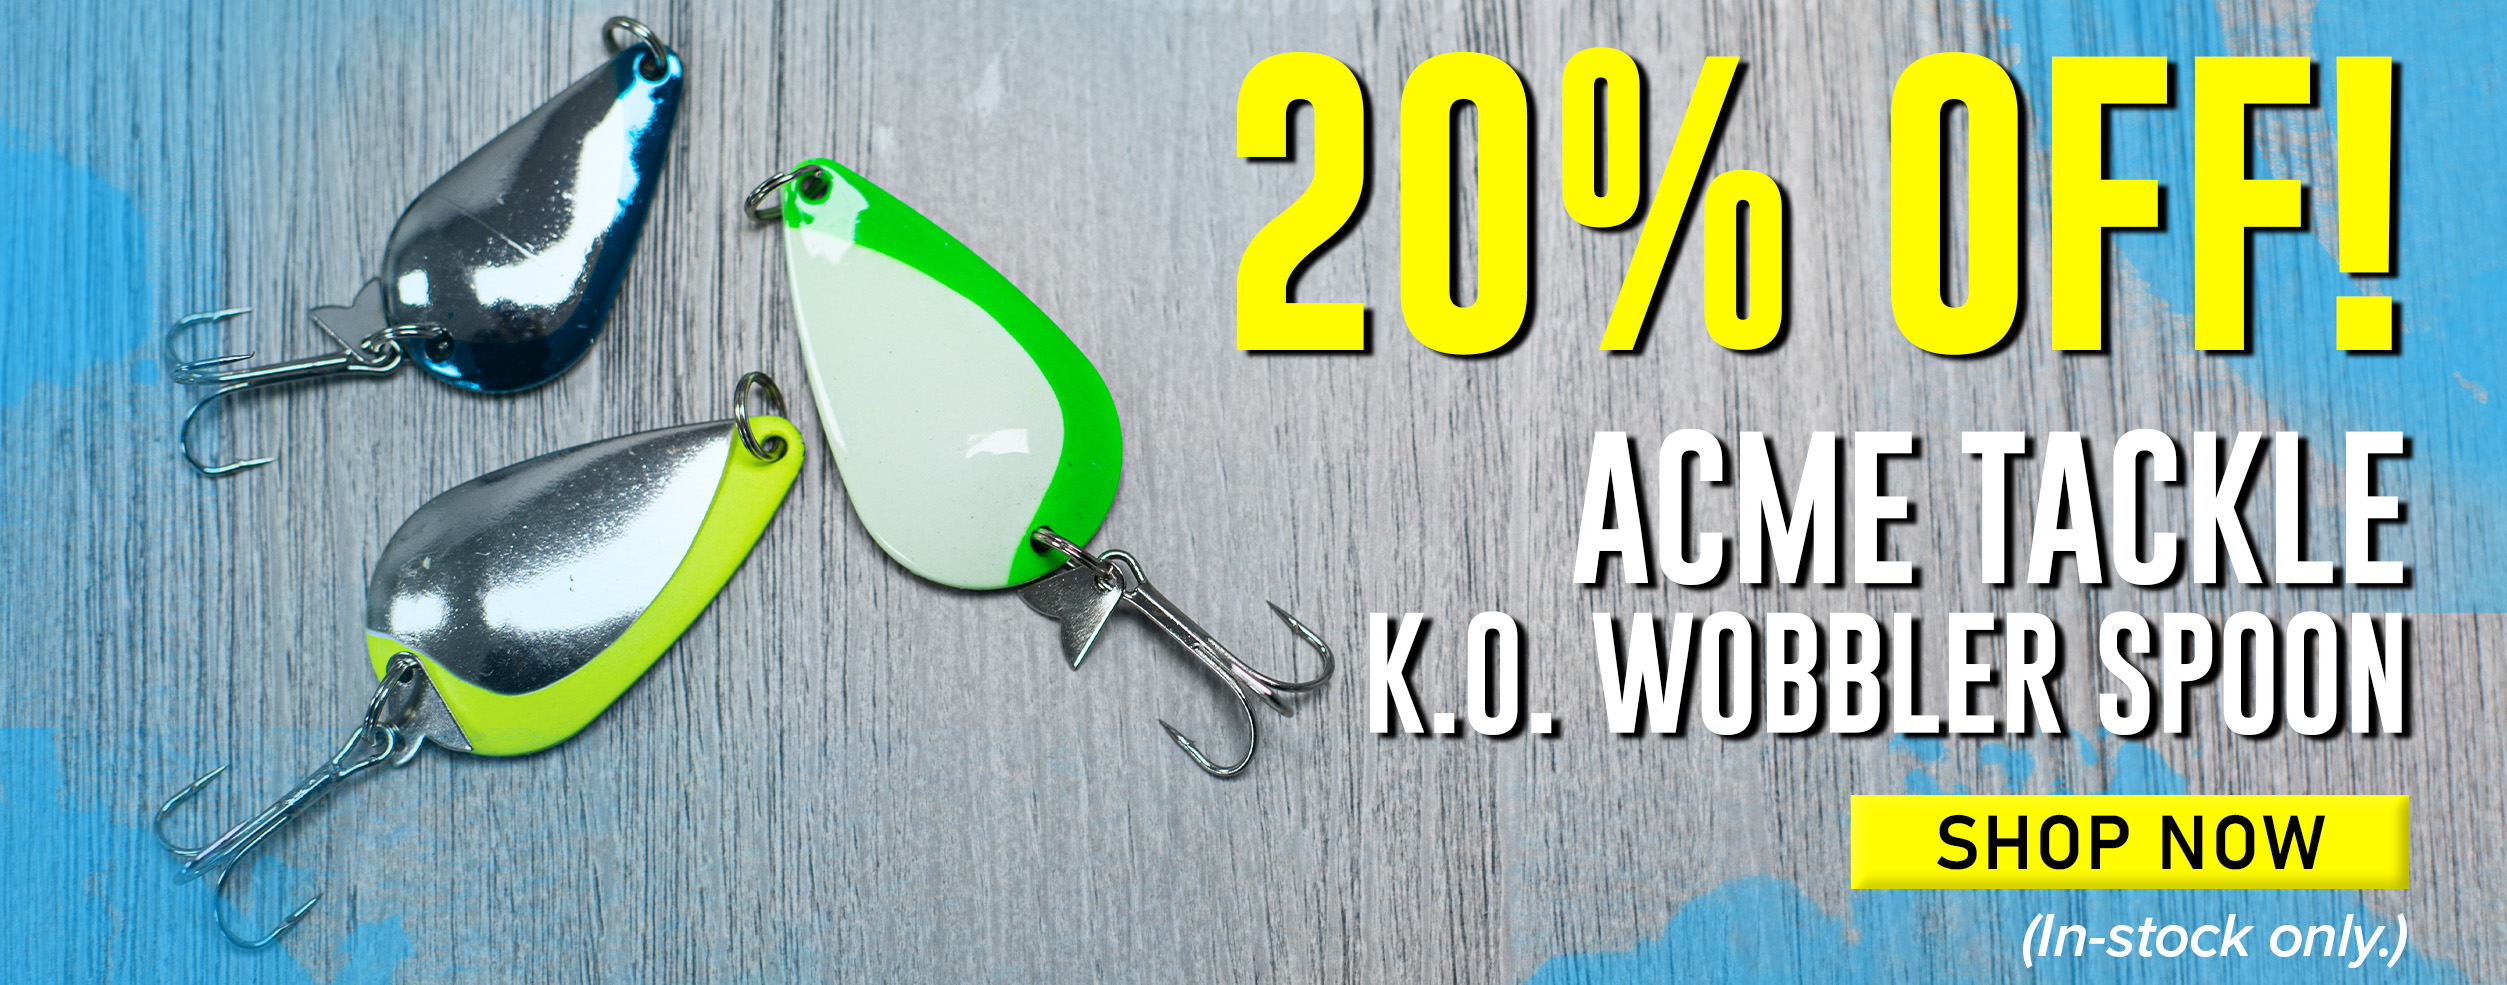 20% Off ACME Tackle K.O. Wobbler Spoon Shop Now (In-stock only.)